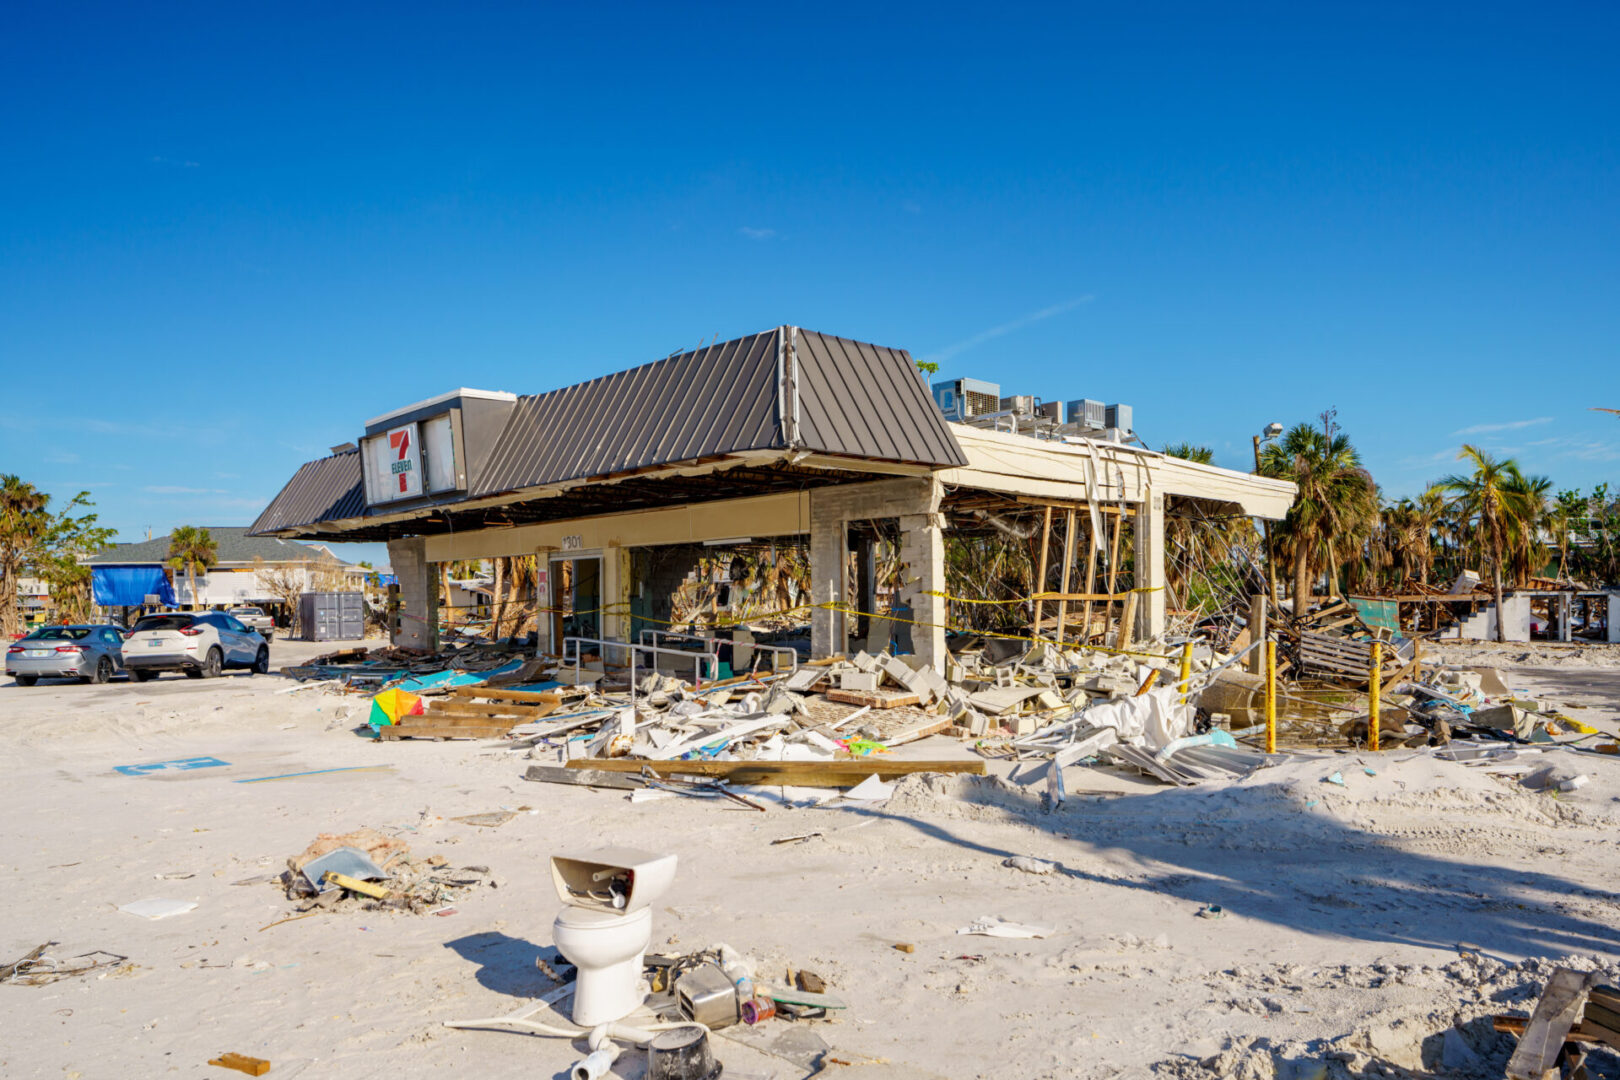 A house that is being demolished on the beach.